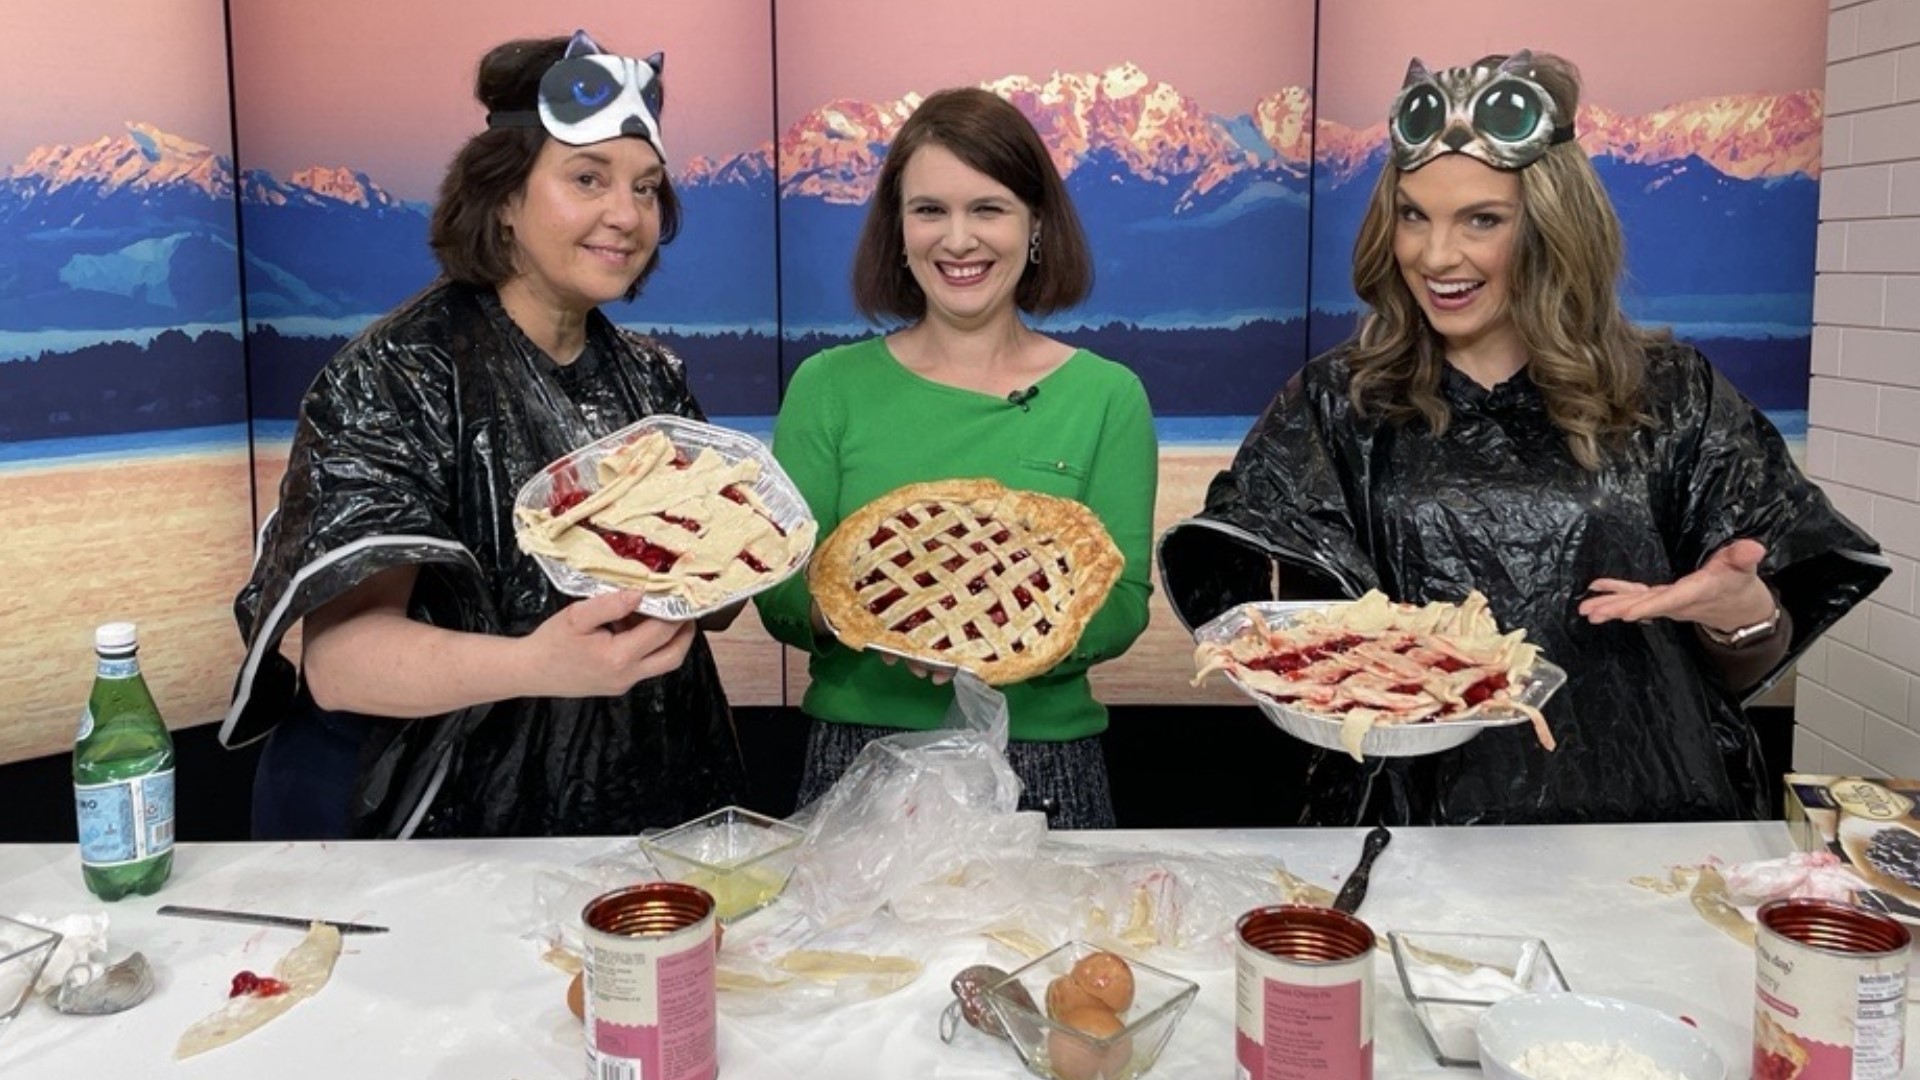 Producer Suzie Wiley and Amity celebrate Pi Day by making pies while blindfolded. #newdaynw